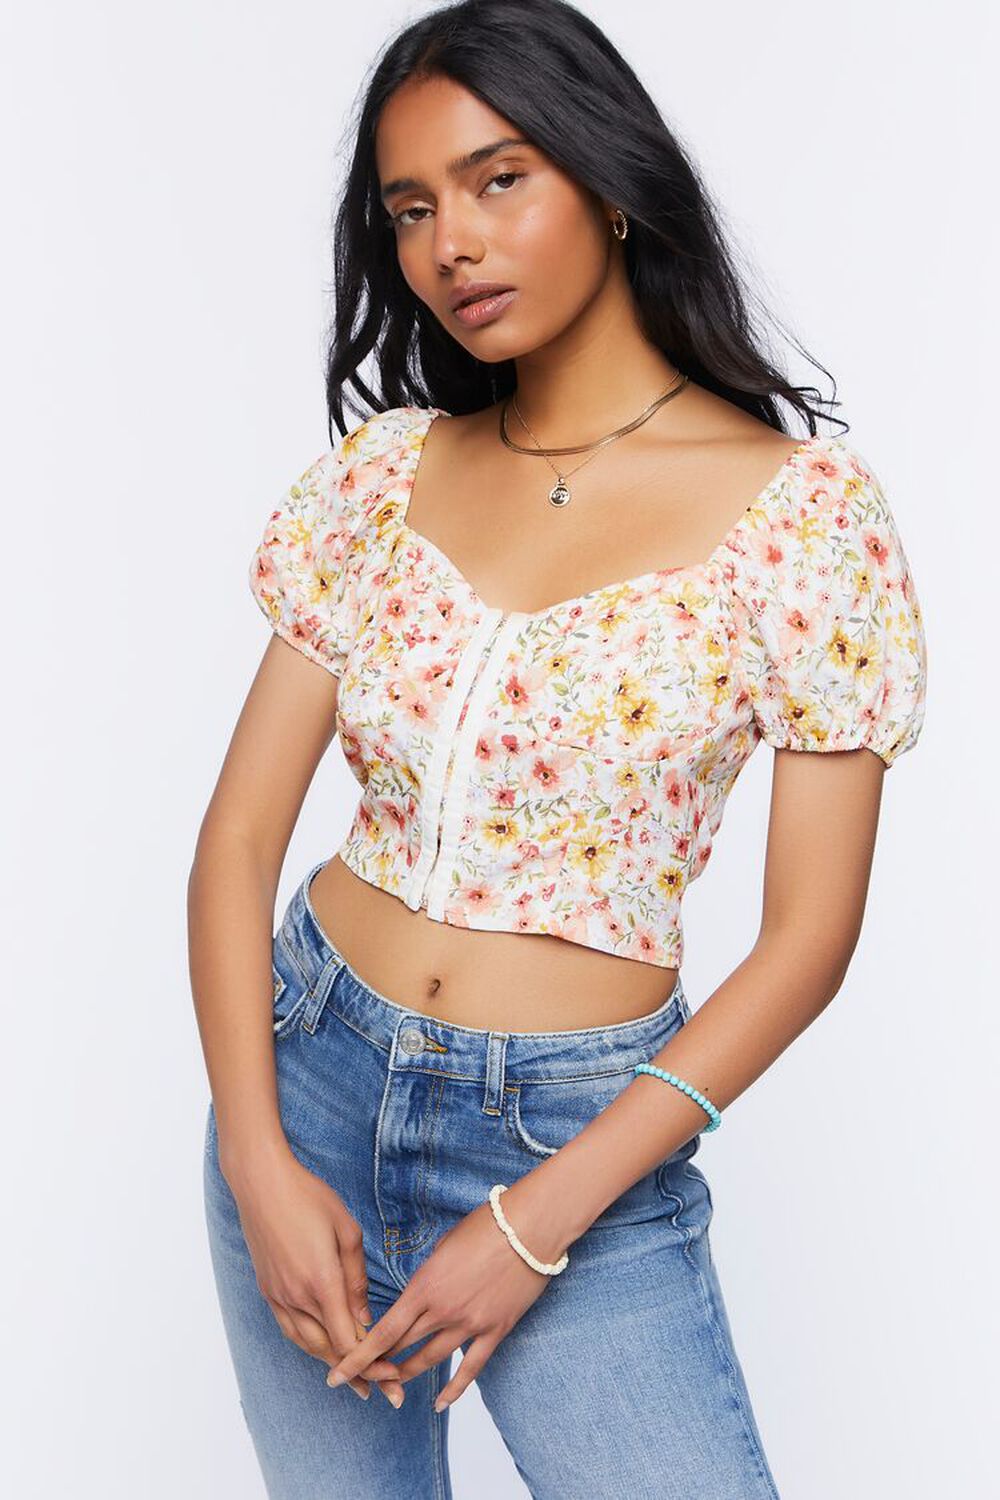 Sweetheart Floral Print Top